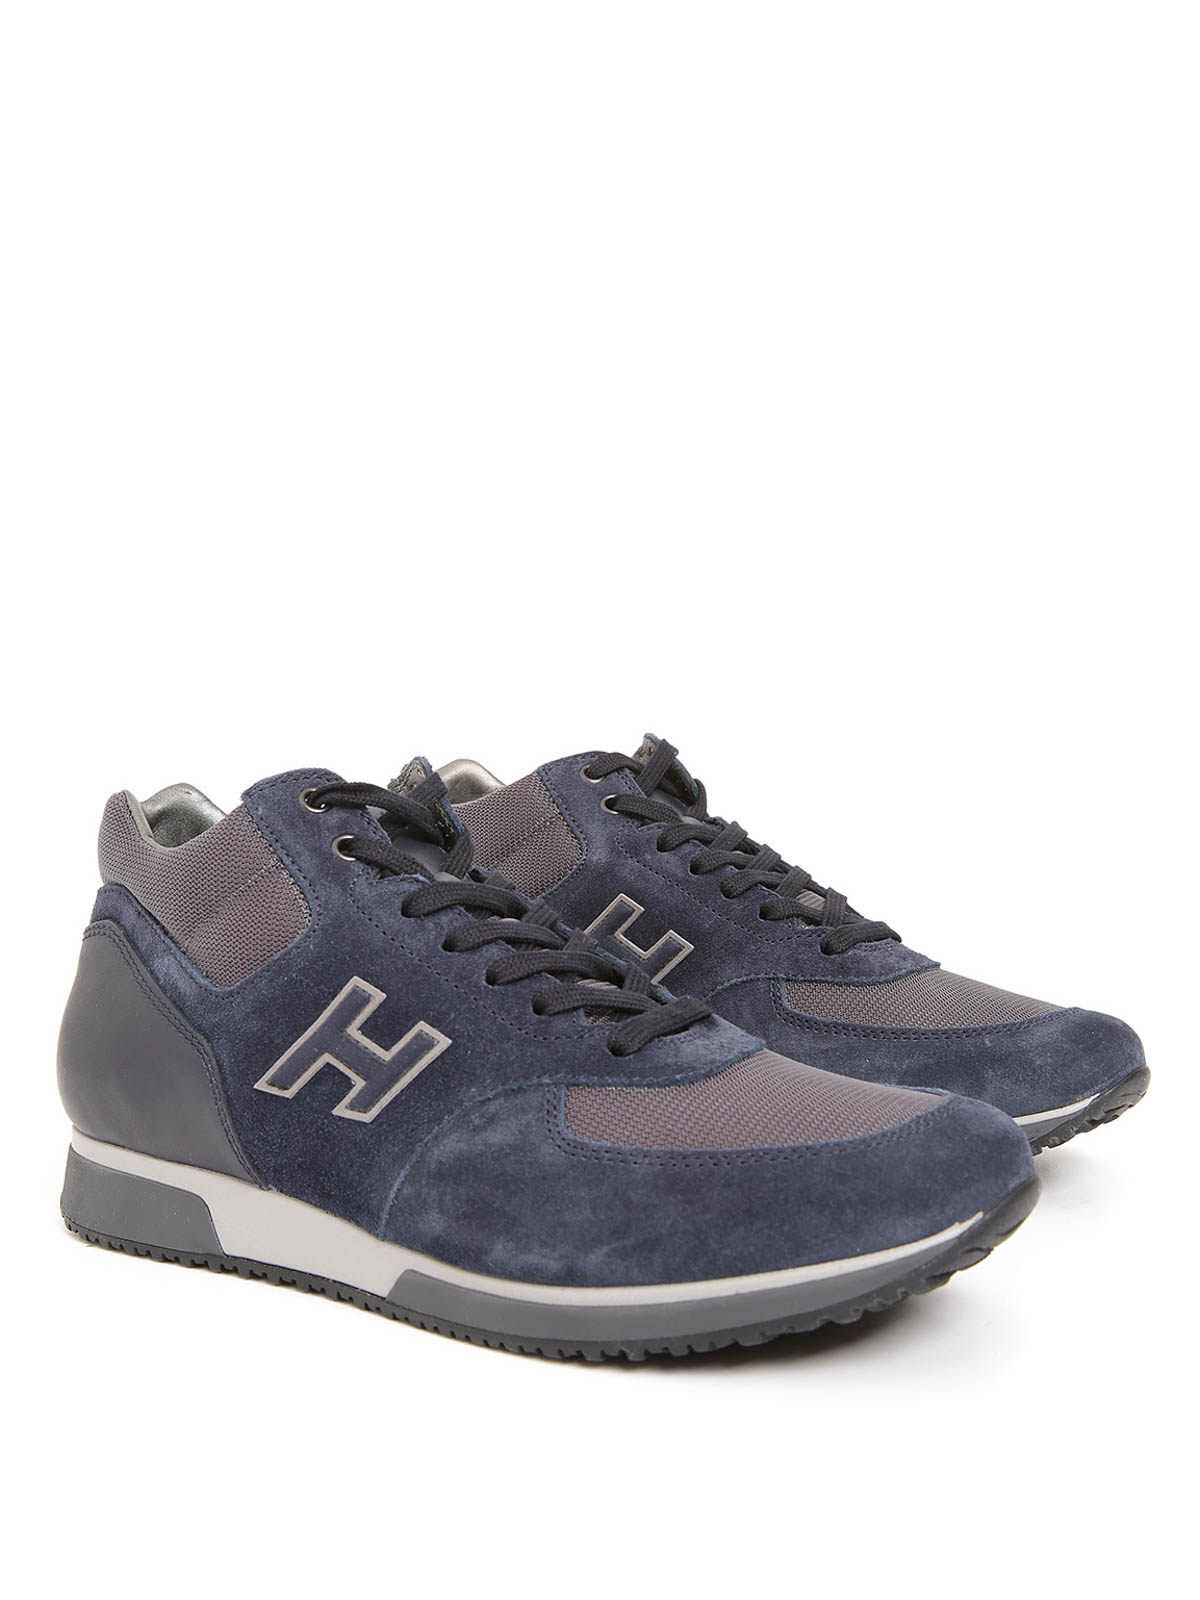 Trainers Hogan - Sneakers H198 - 980O4309IE680 | Shop online at iKRIX